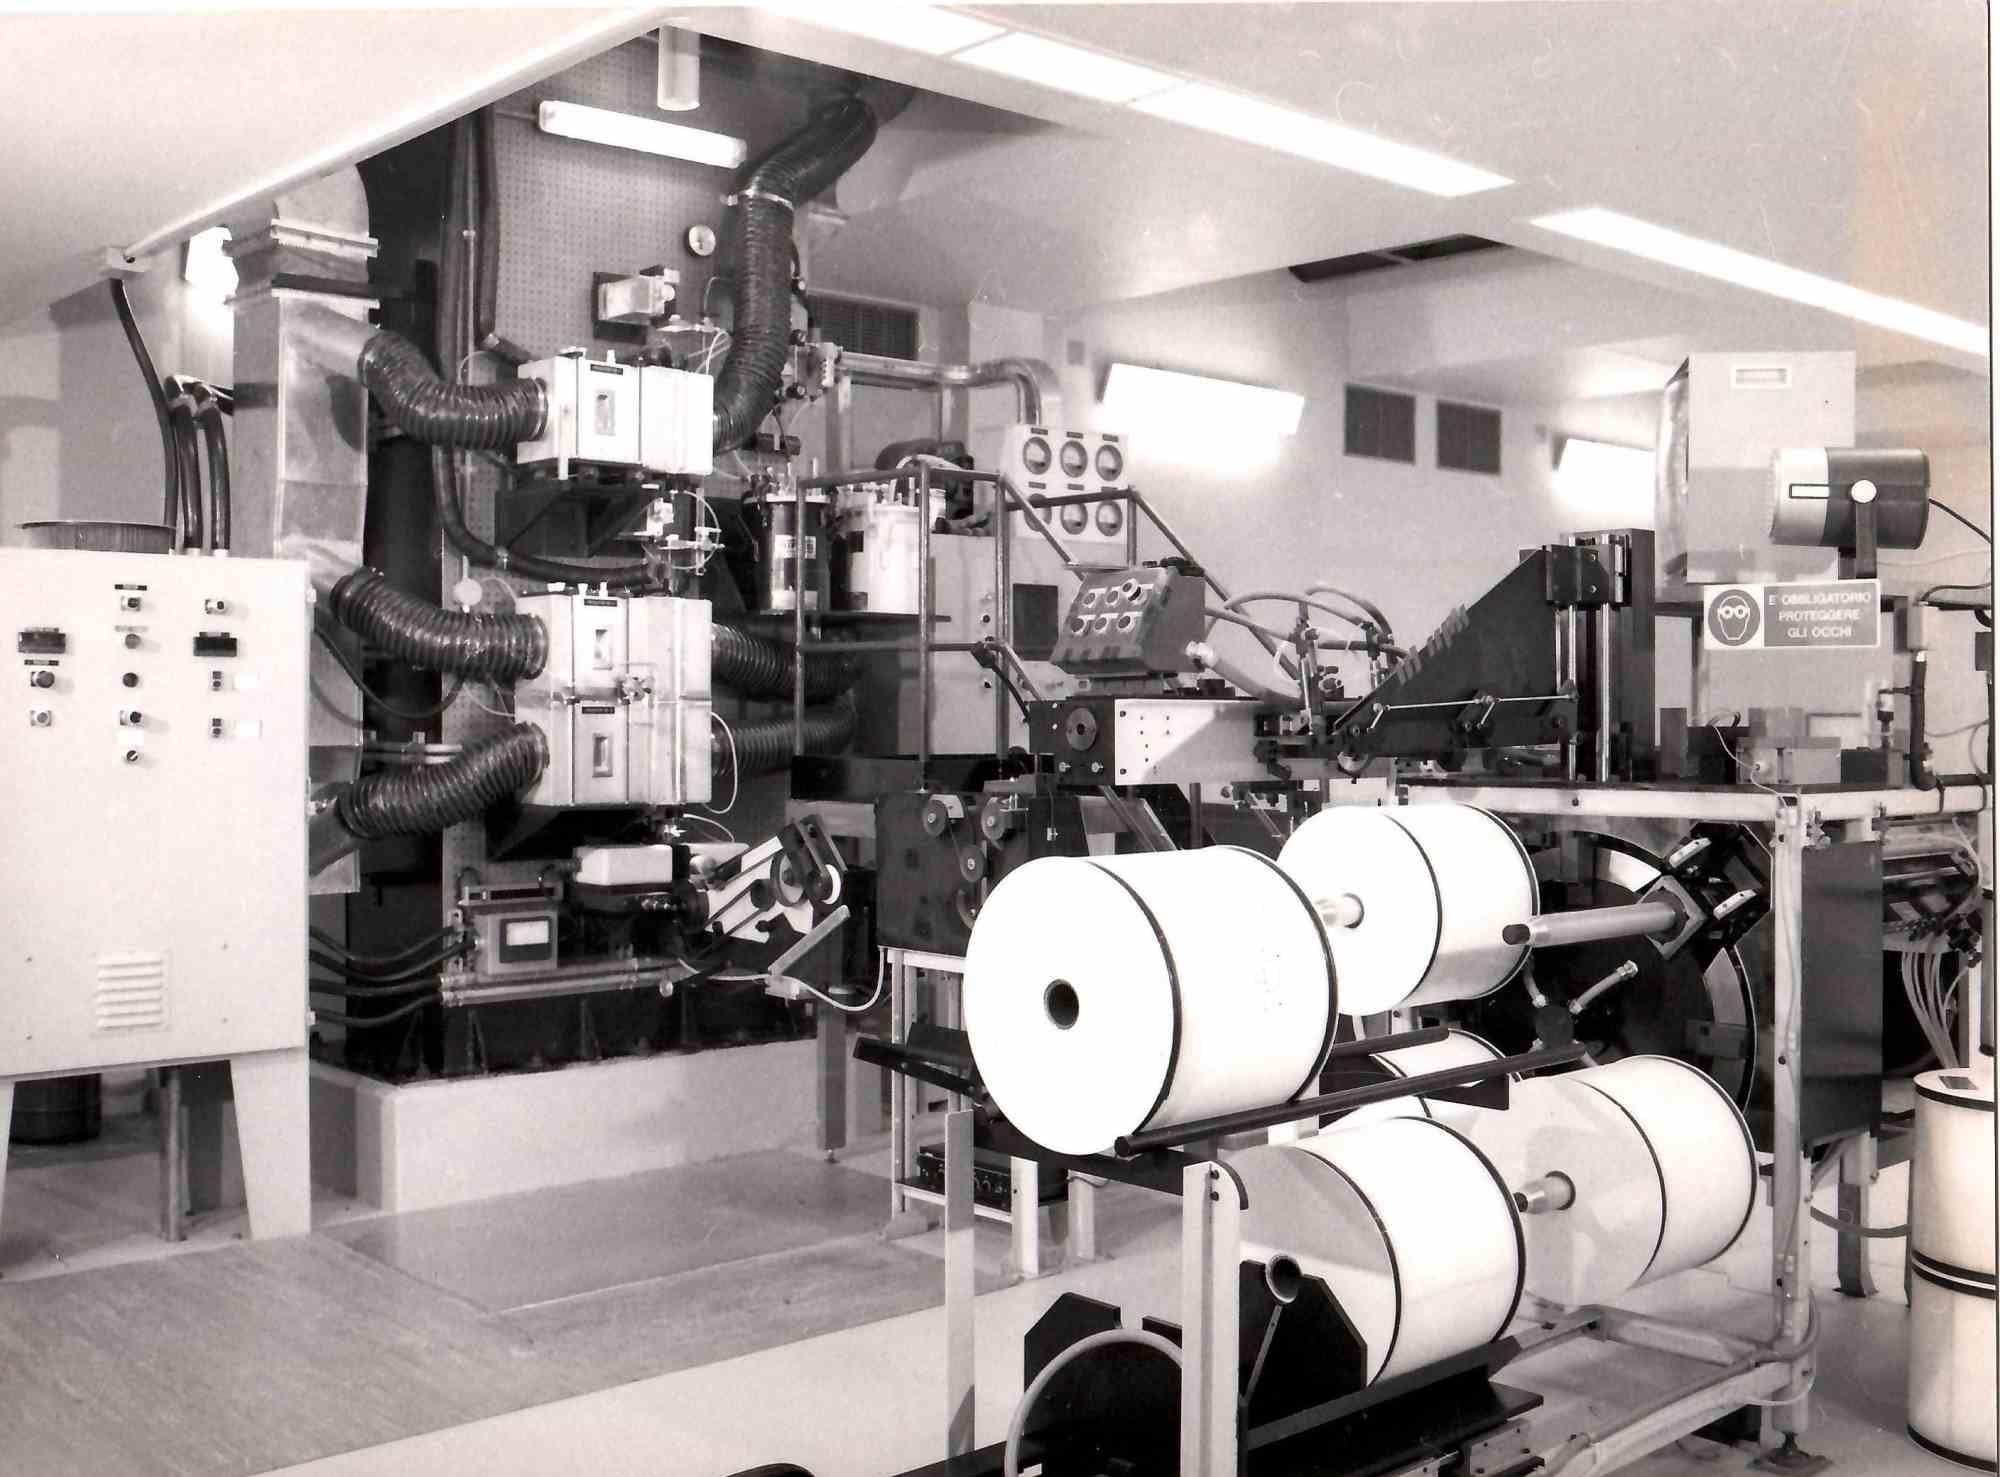 Unknown Black and White Photograph – Final Winding on the Reel of the Optical Fiber - Vintage B/W Foto - 1990er Jahre